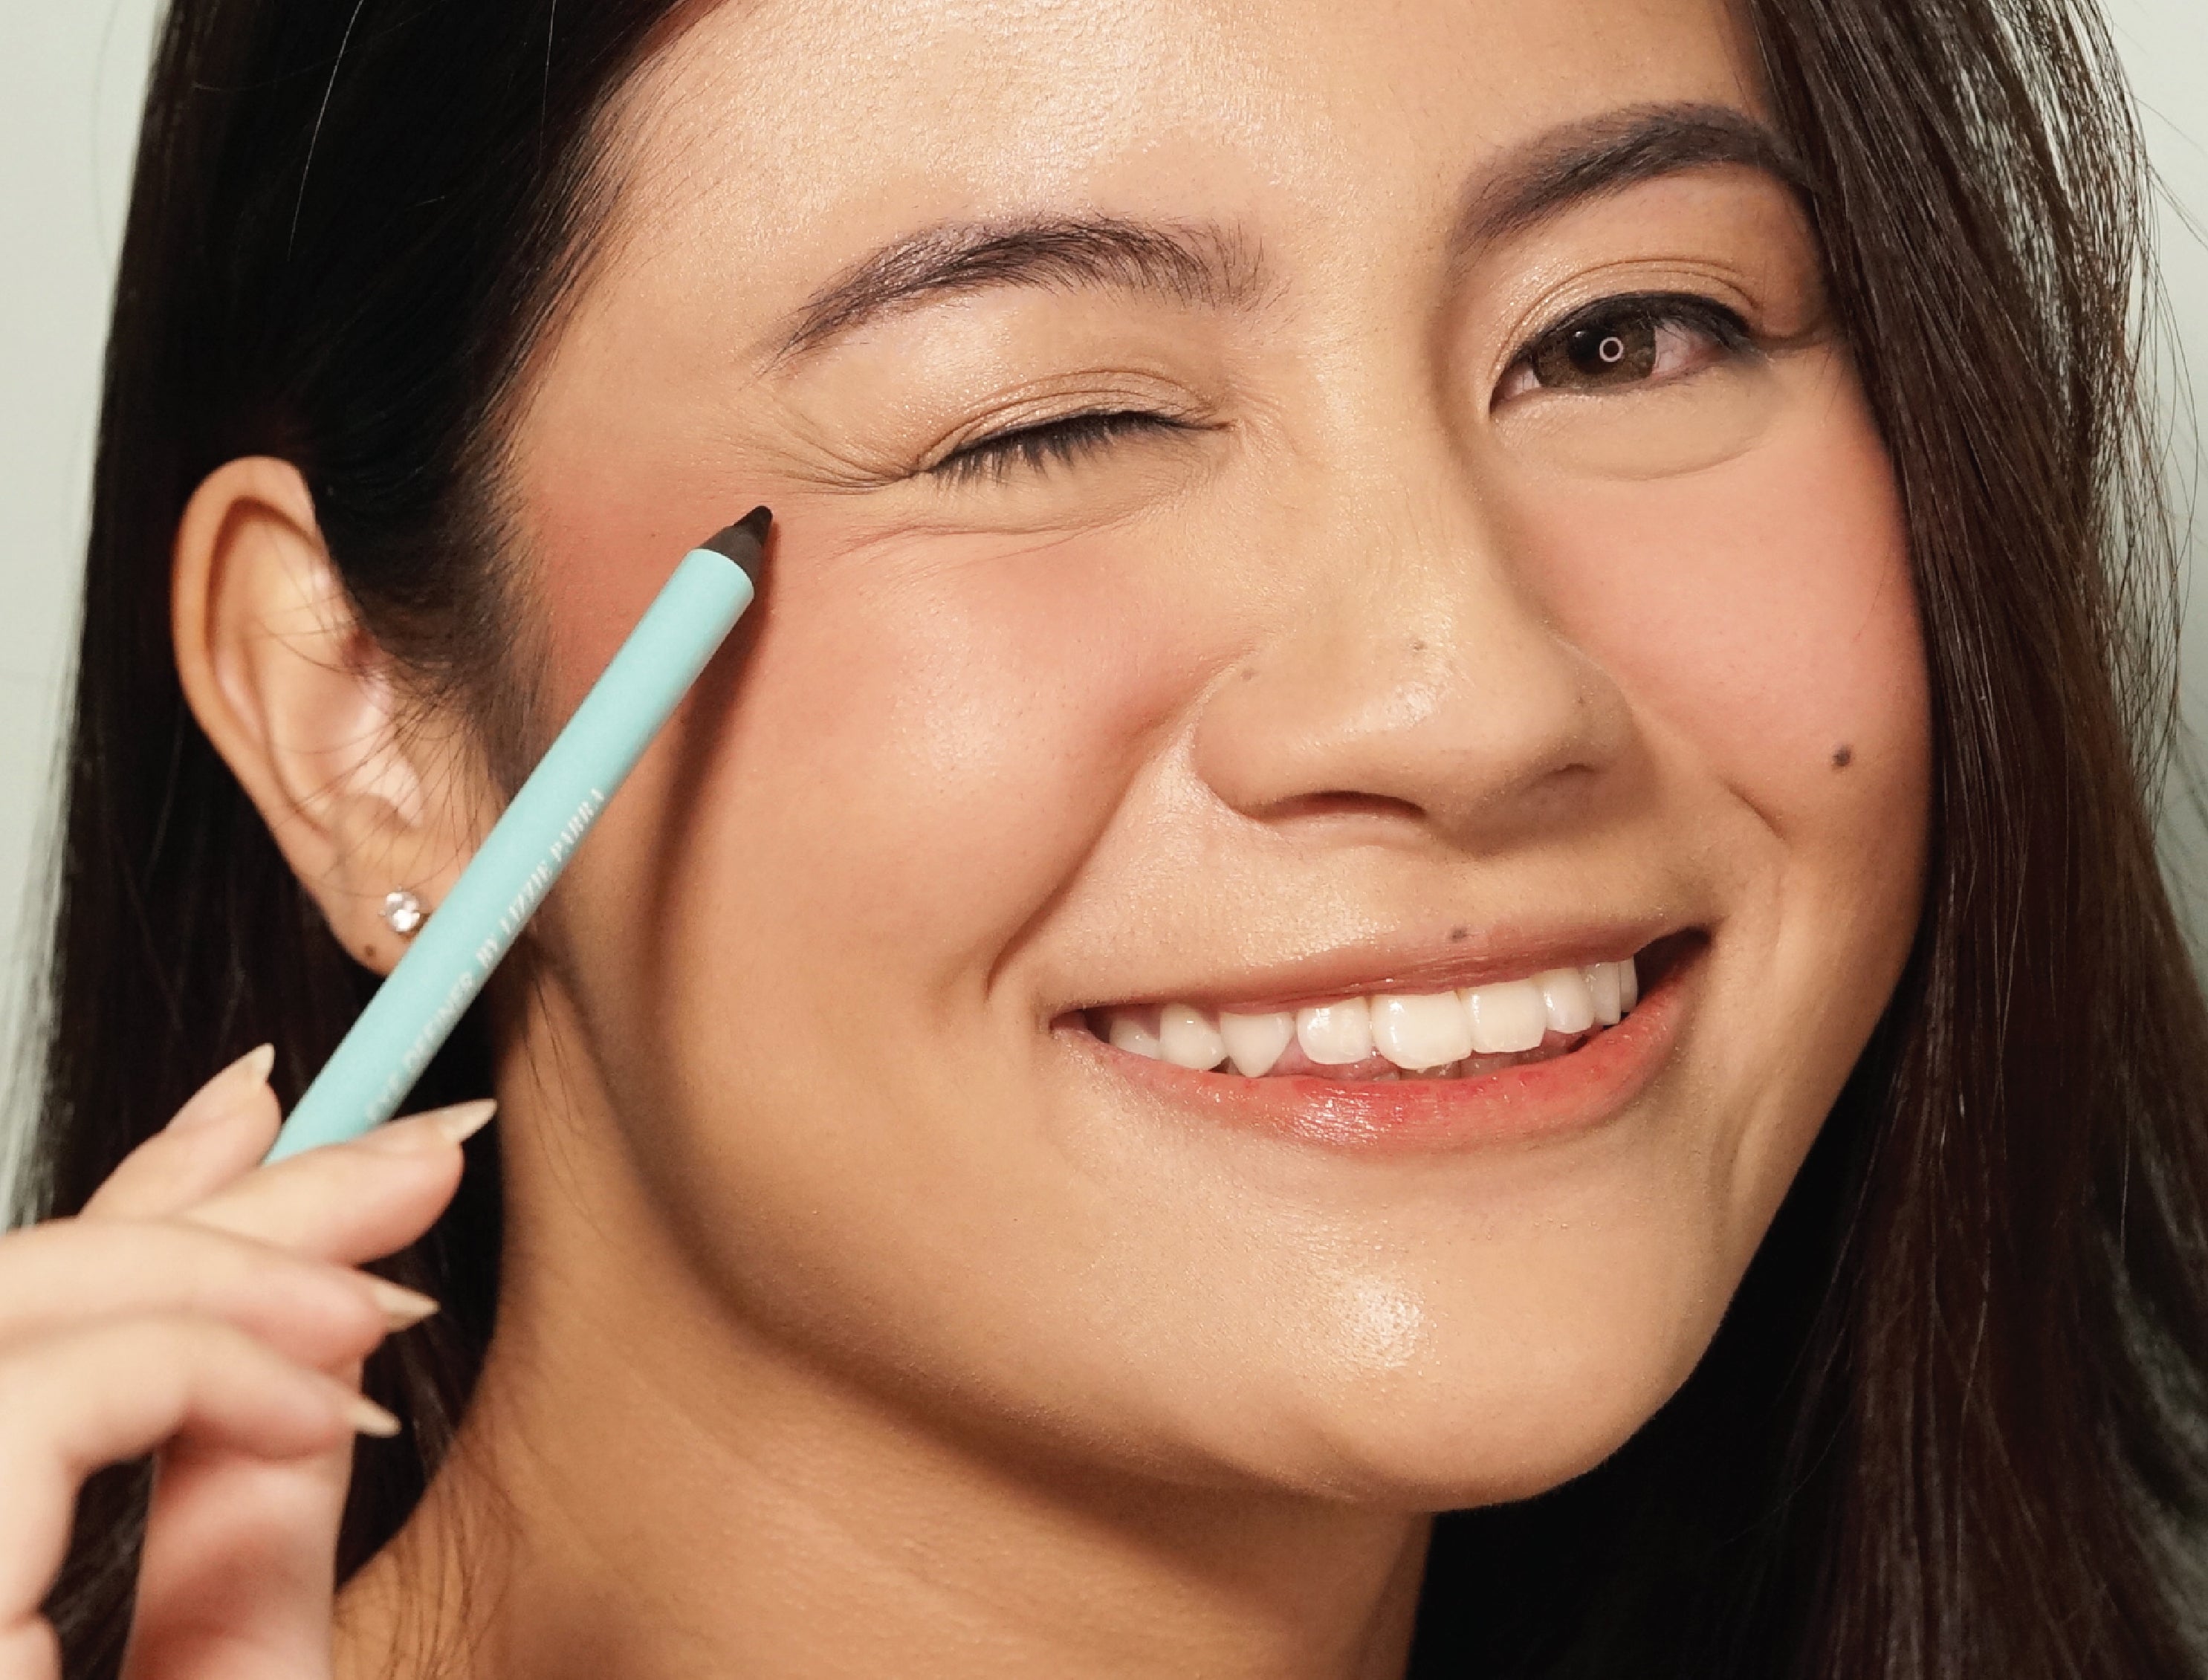 HOW TO | Eyeliner Hacks: Simple and Easy Ways to Draw the Line